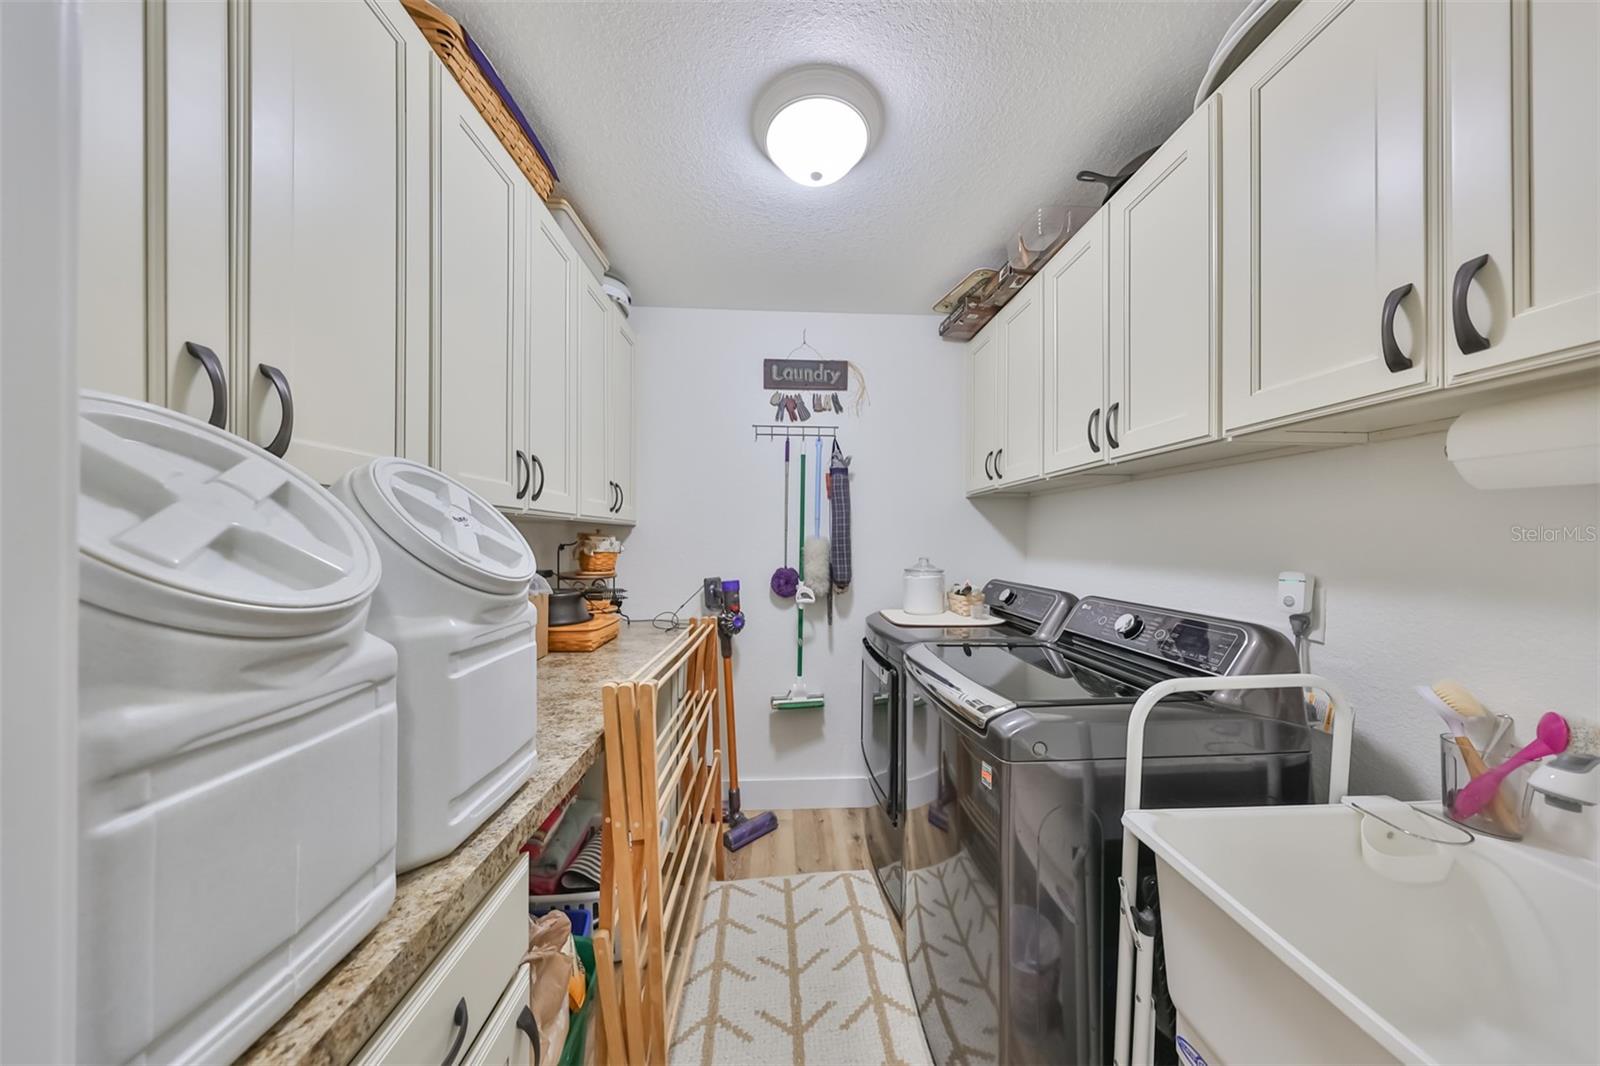 This large indoor laundry room has bright lights, TONS of cabinets for additional storage, utility sink and granite countertops to make doing laundry a breeze.